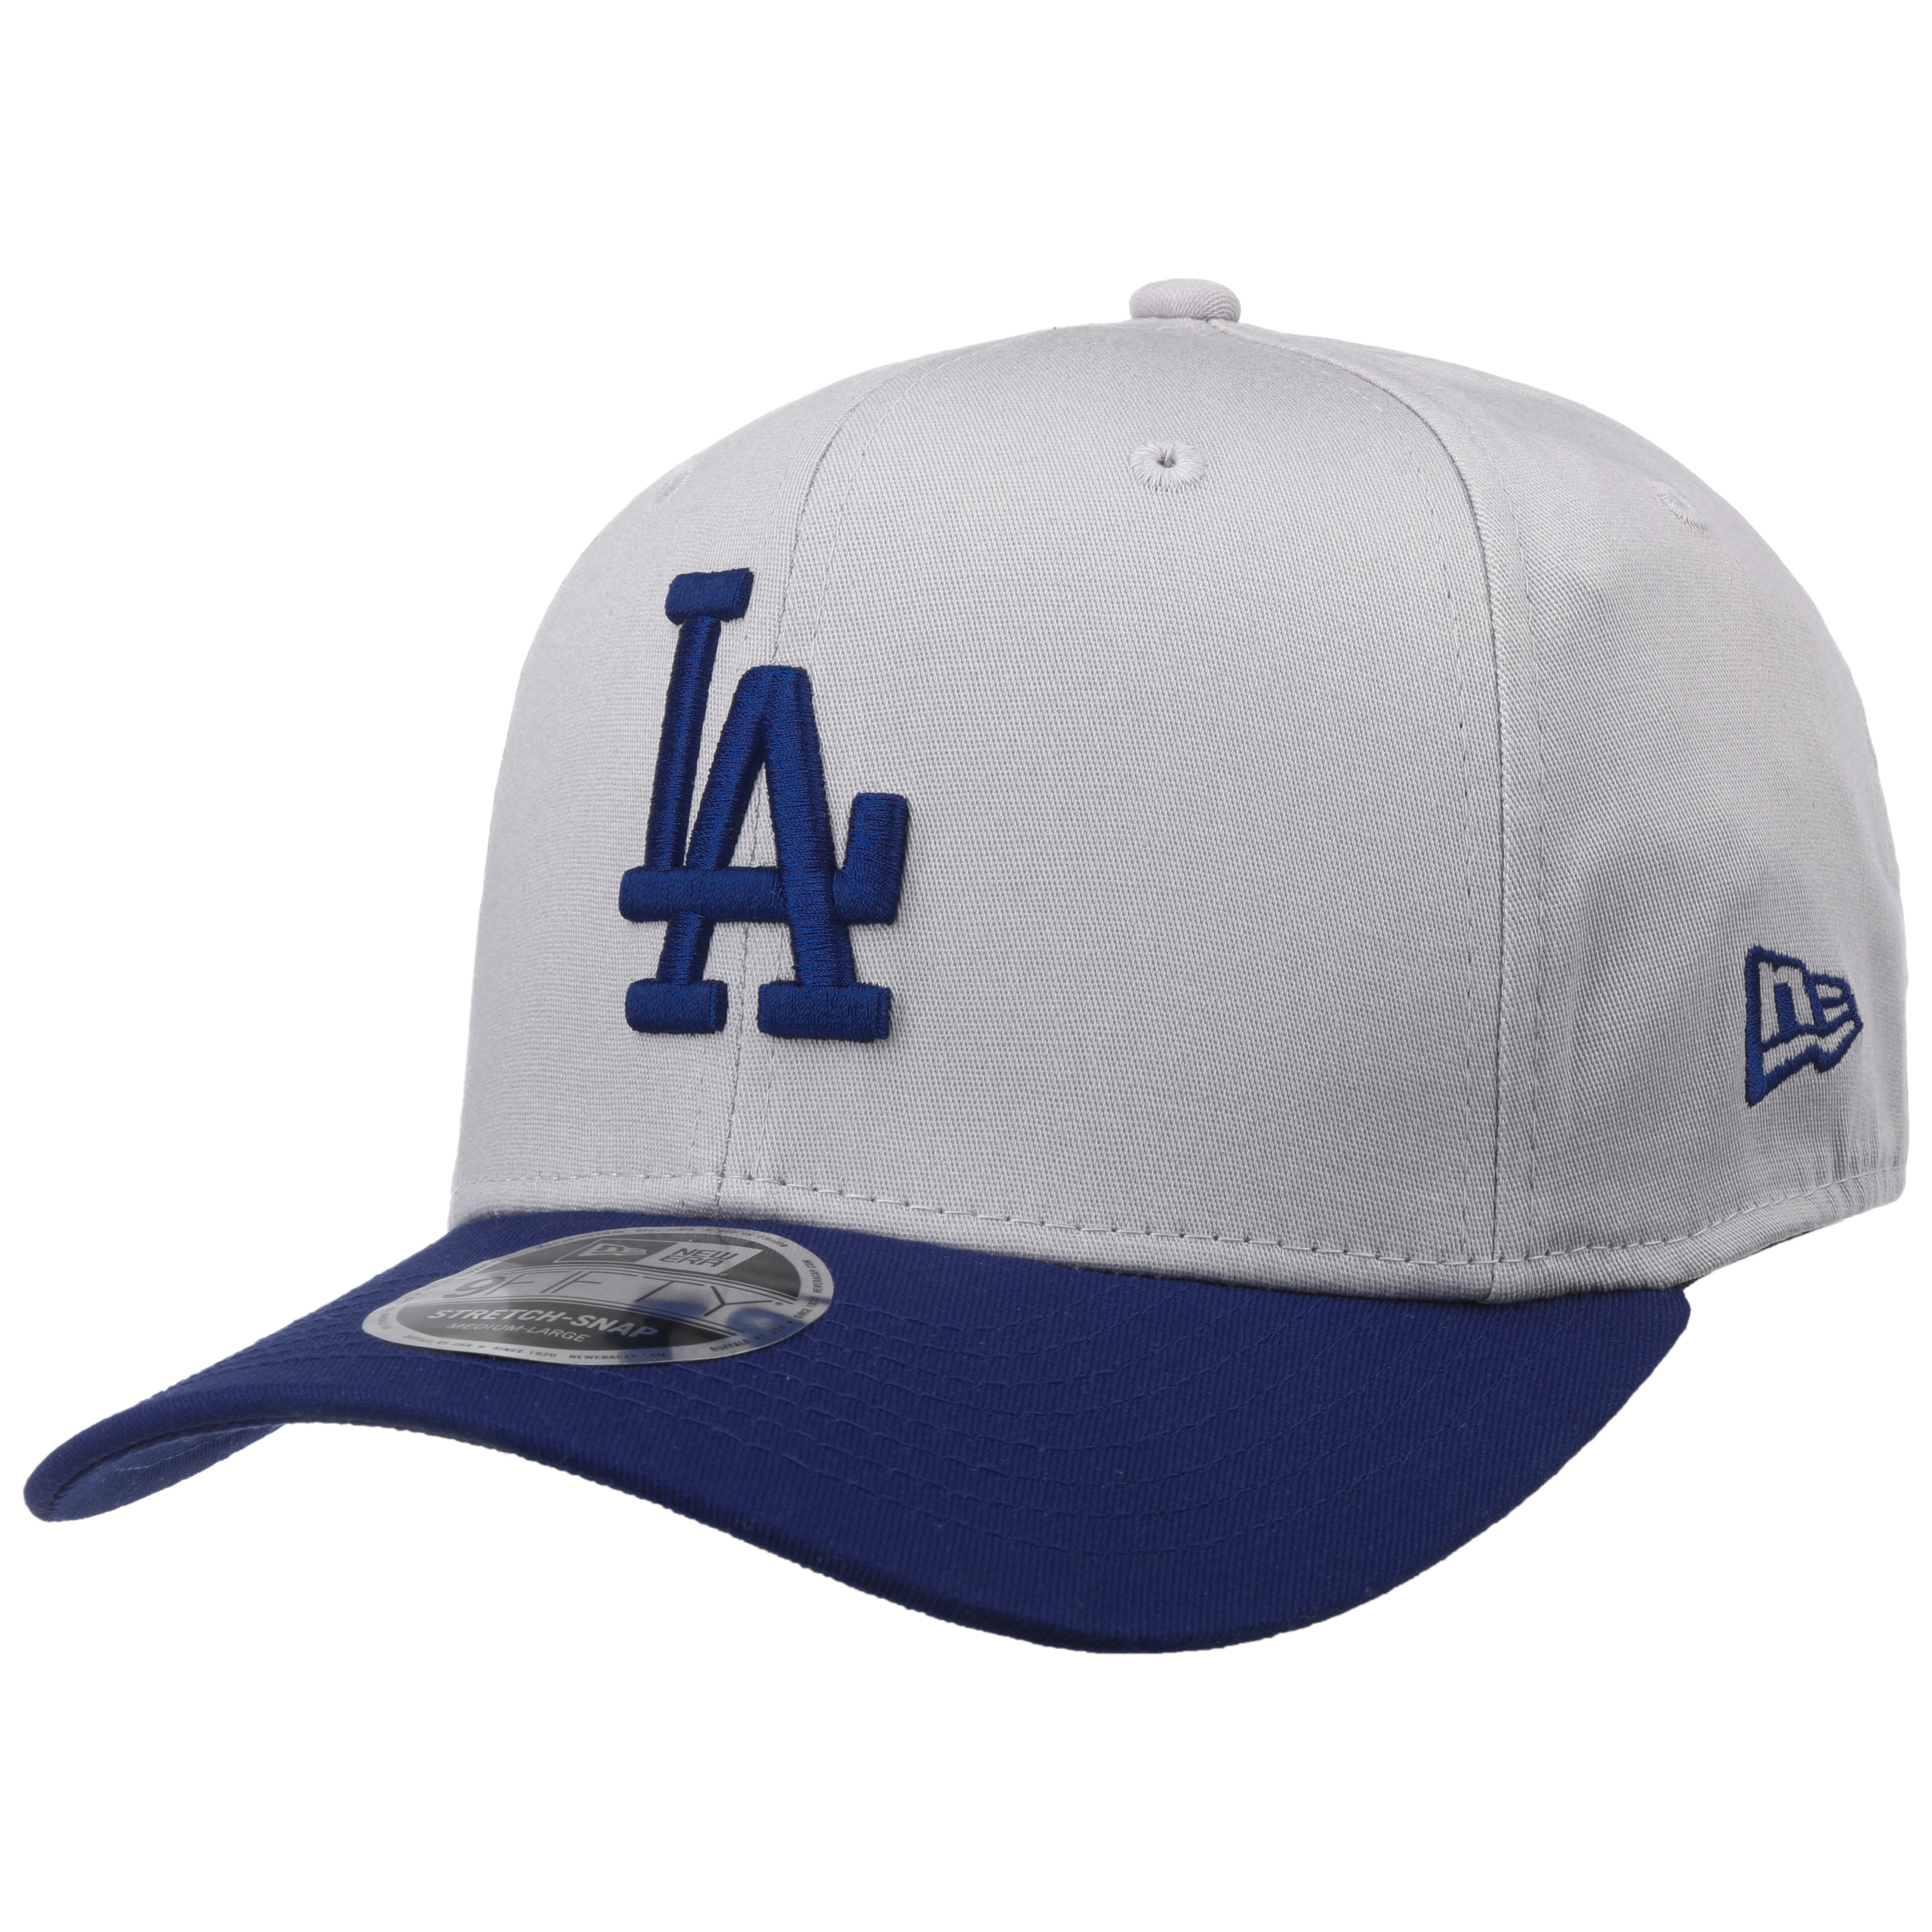 Los Angeles Dodgers Jersey Team Speckle New Era 9fifty gray cap